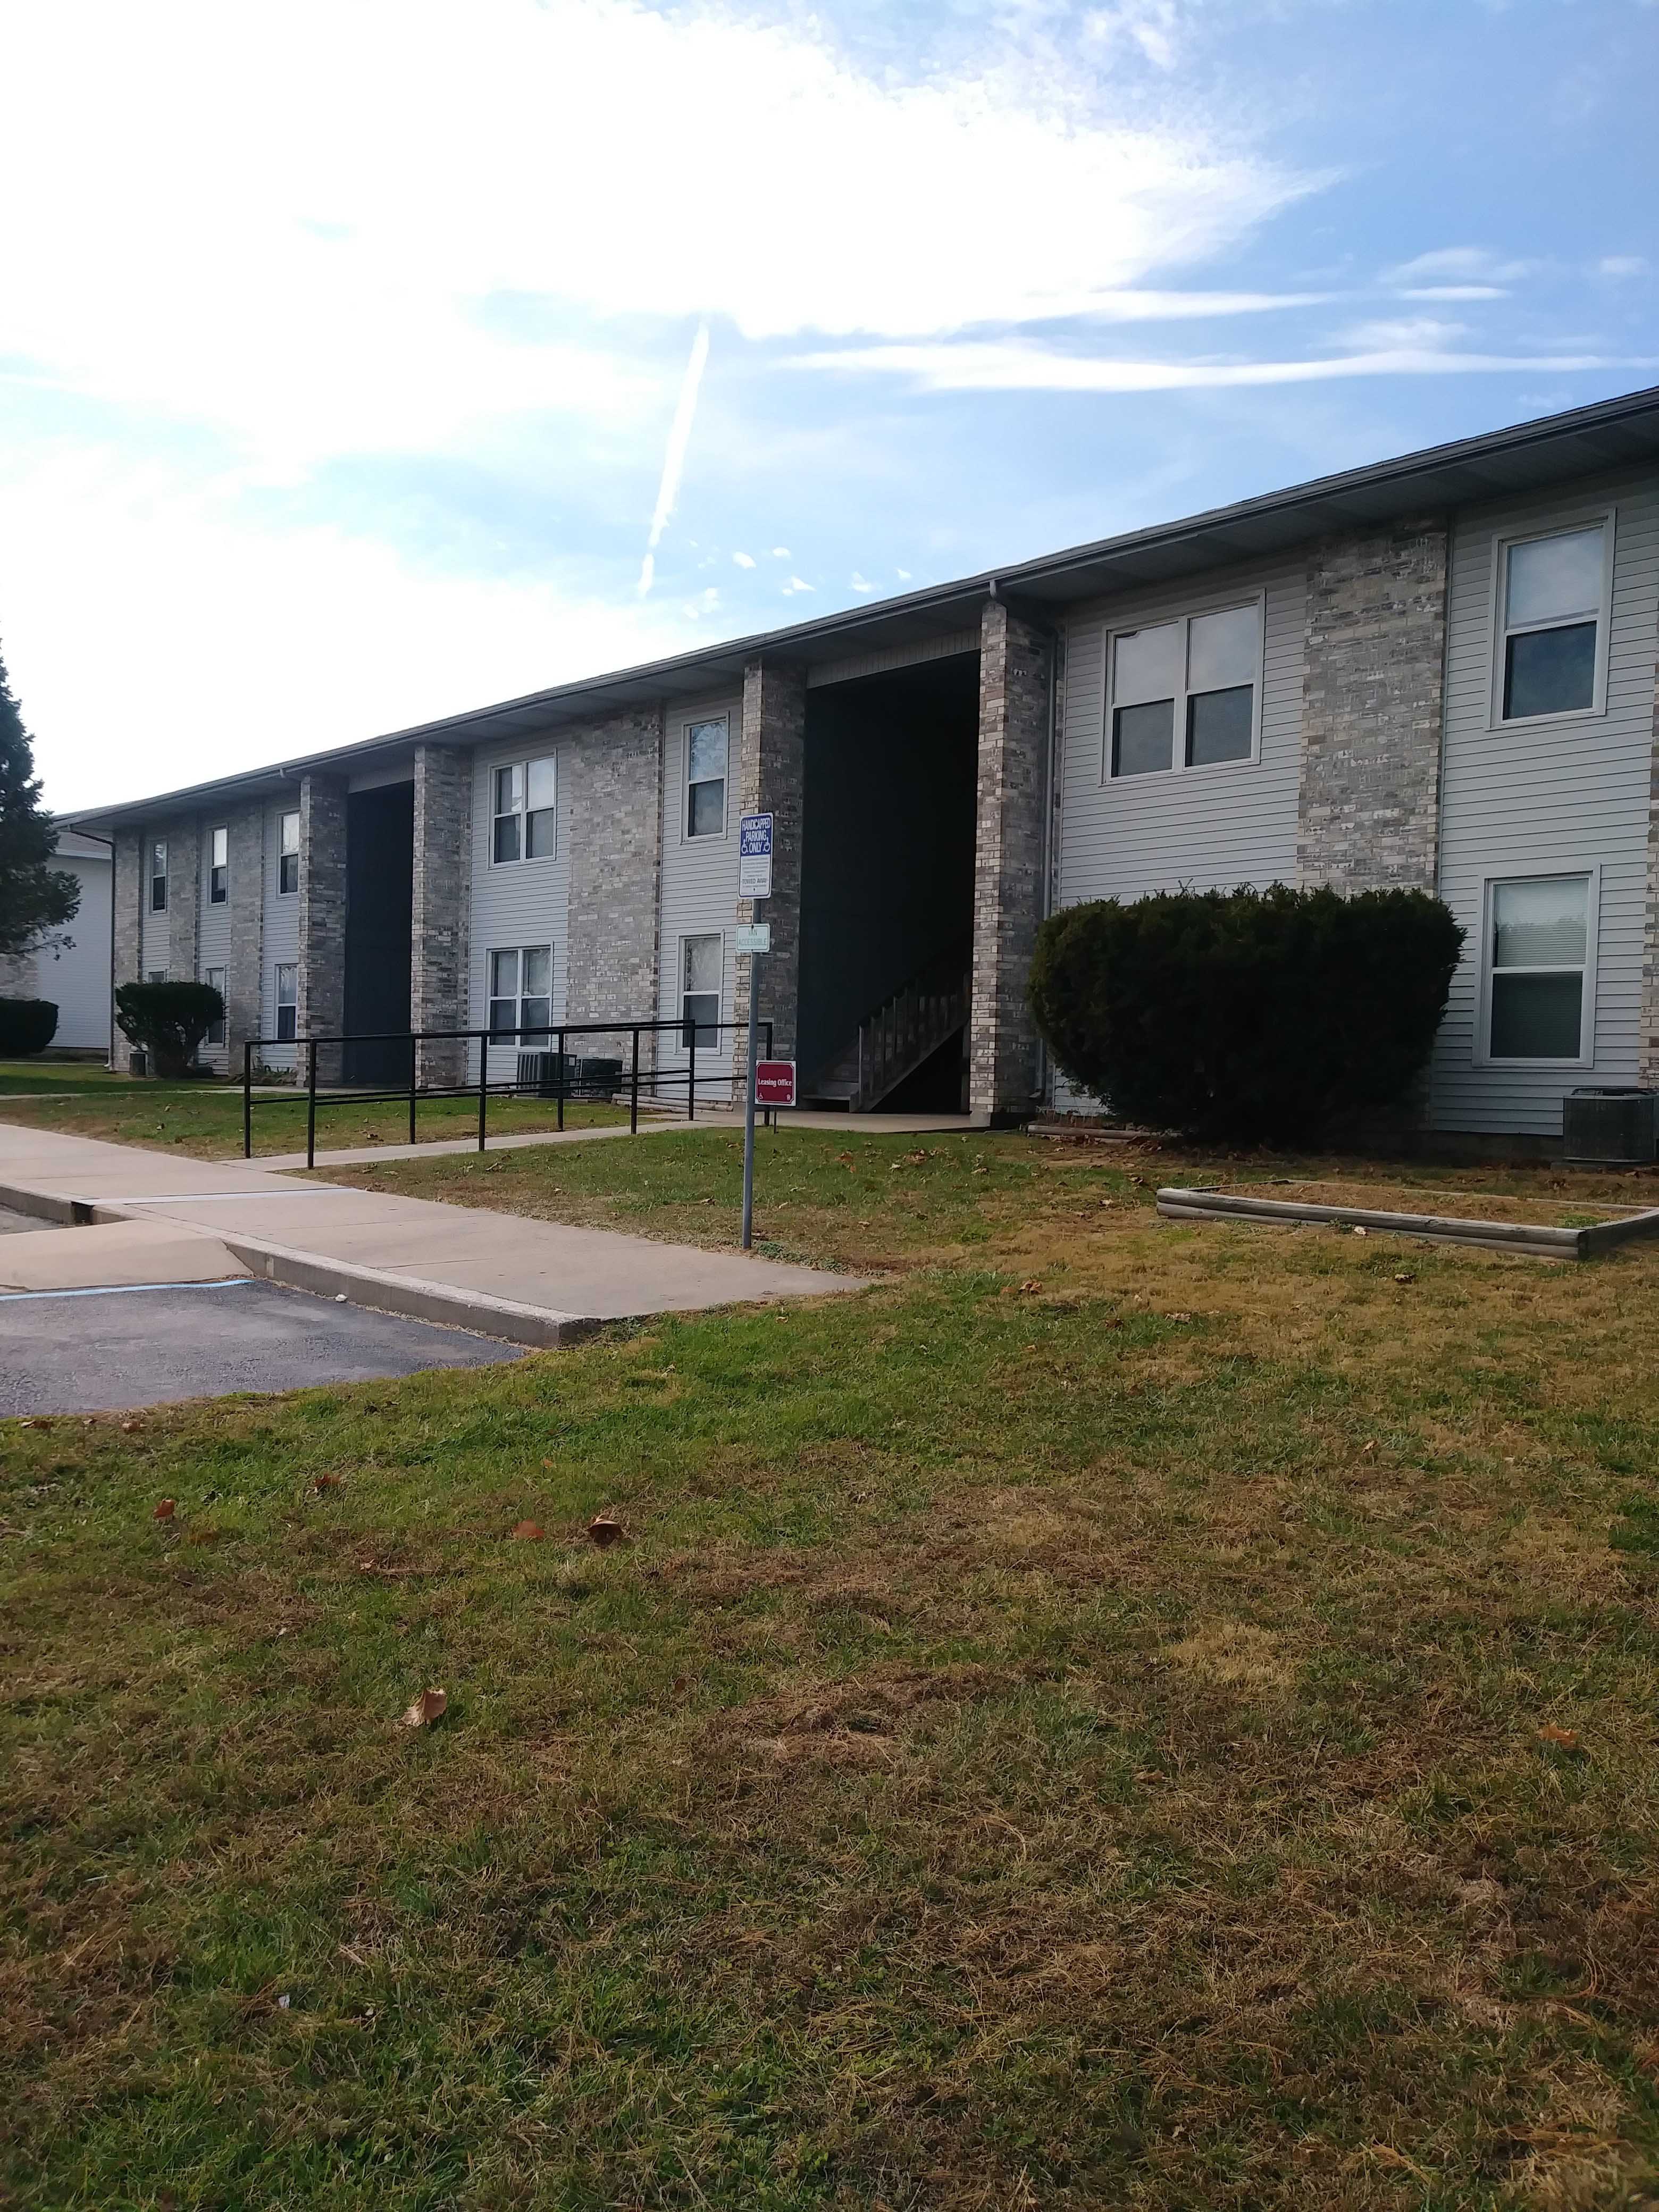 Sycamore South Apartments Affordable/ Public Housing